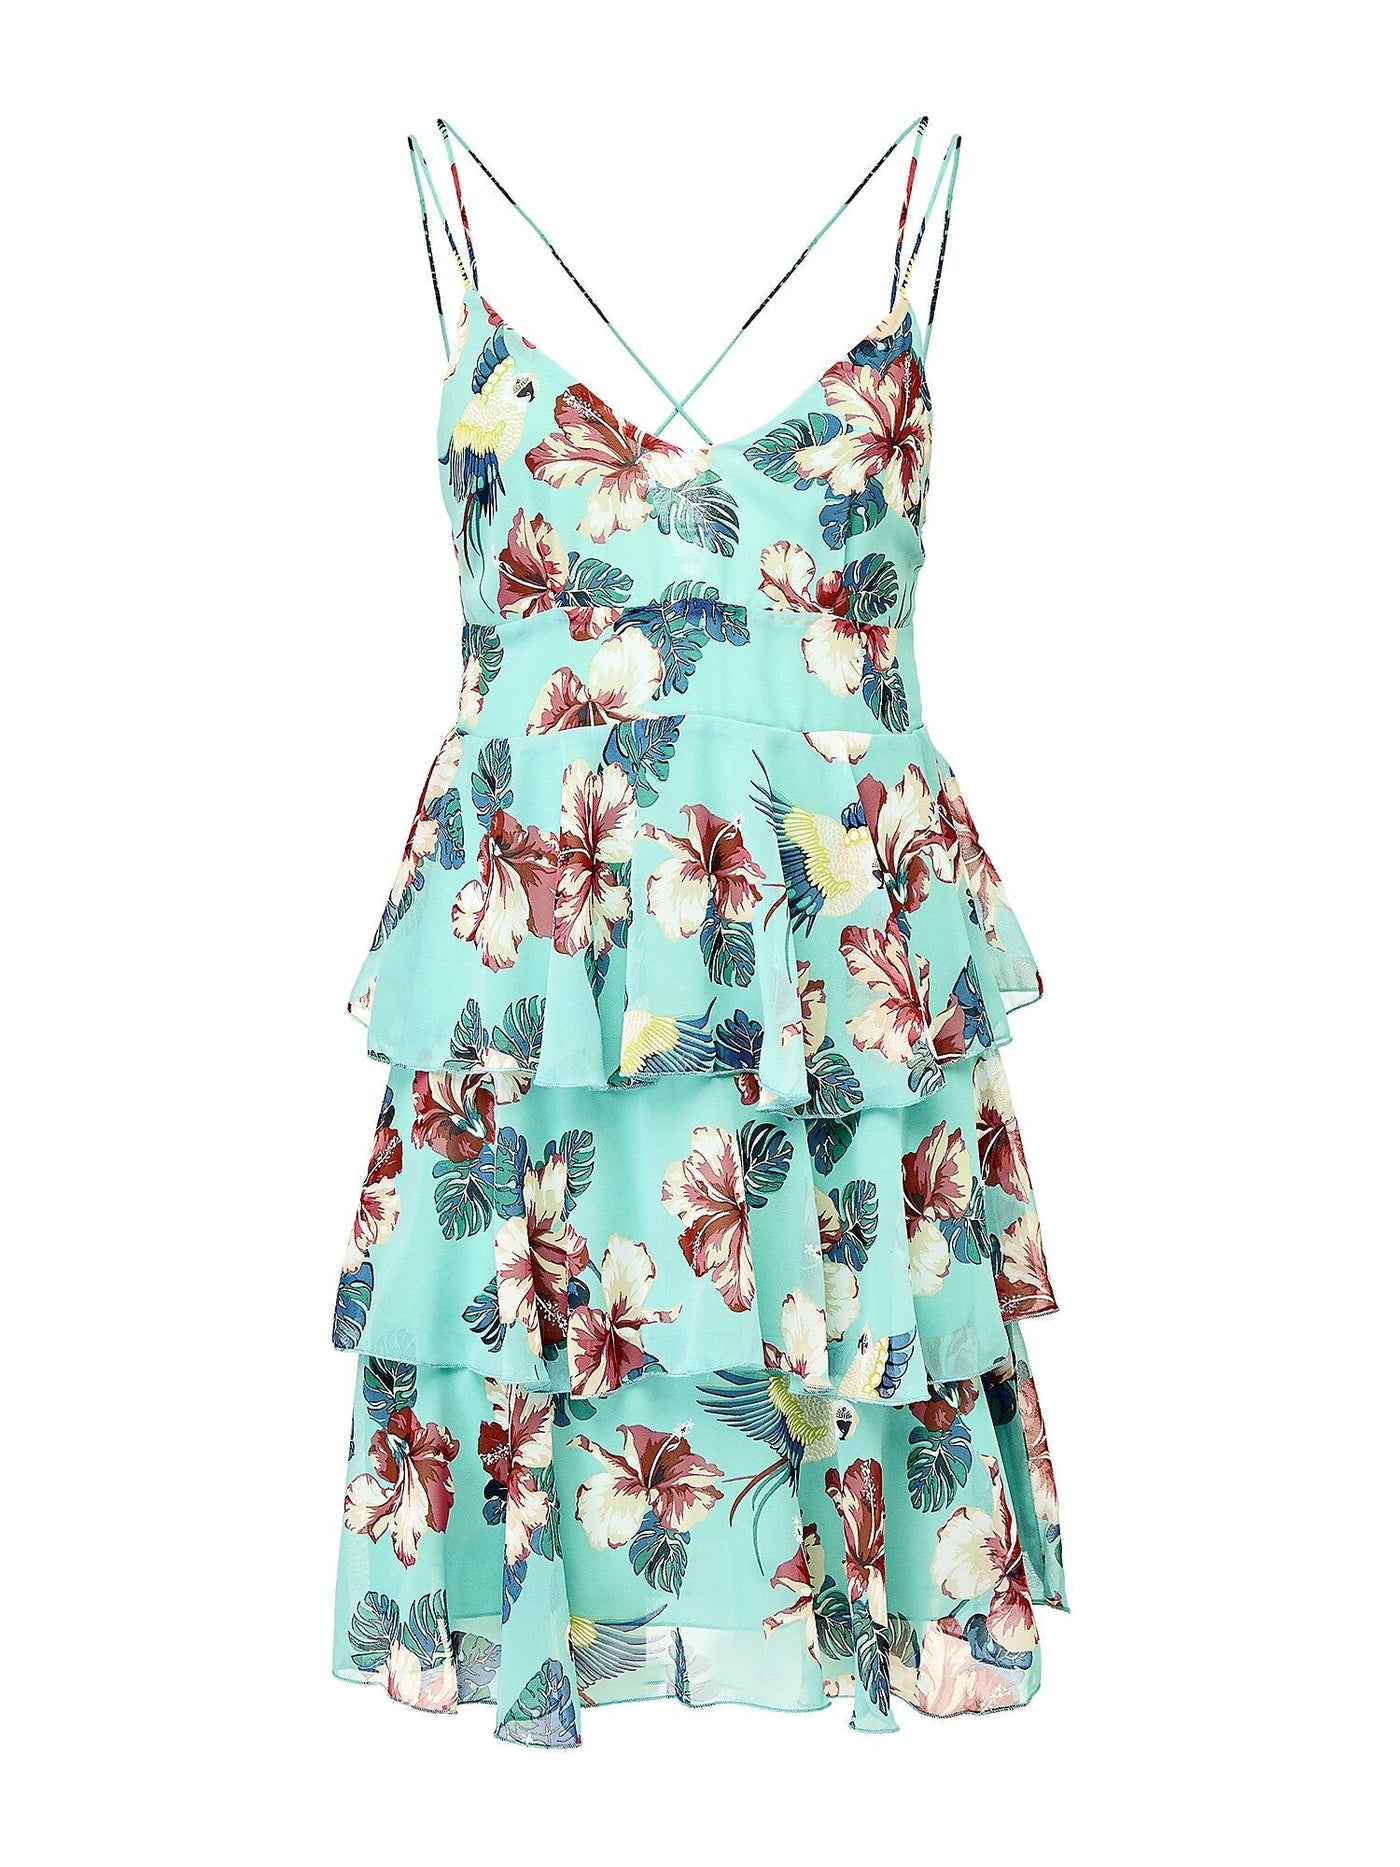 GUESS Womens Green Sheer Ruffled Floral Spaghetti Strap V Neck Short Evening Fit + Flare Dress S